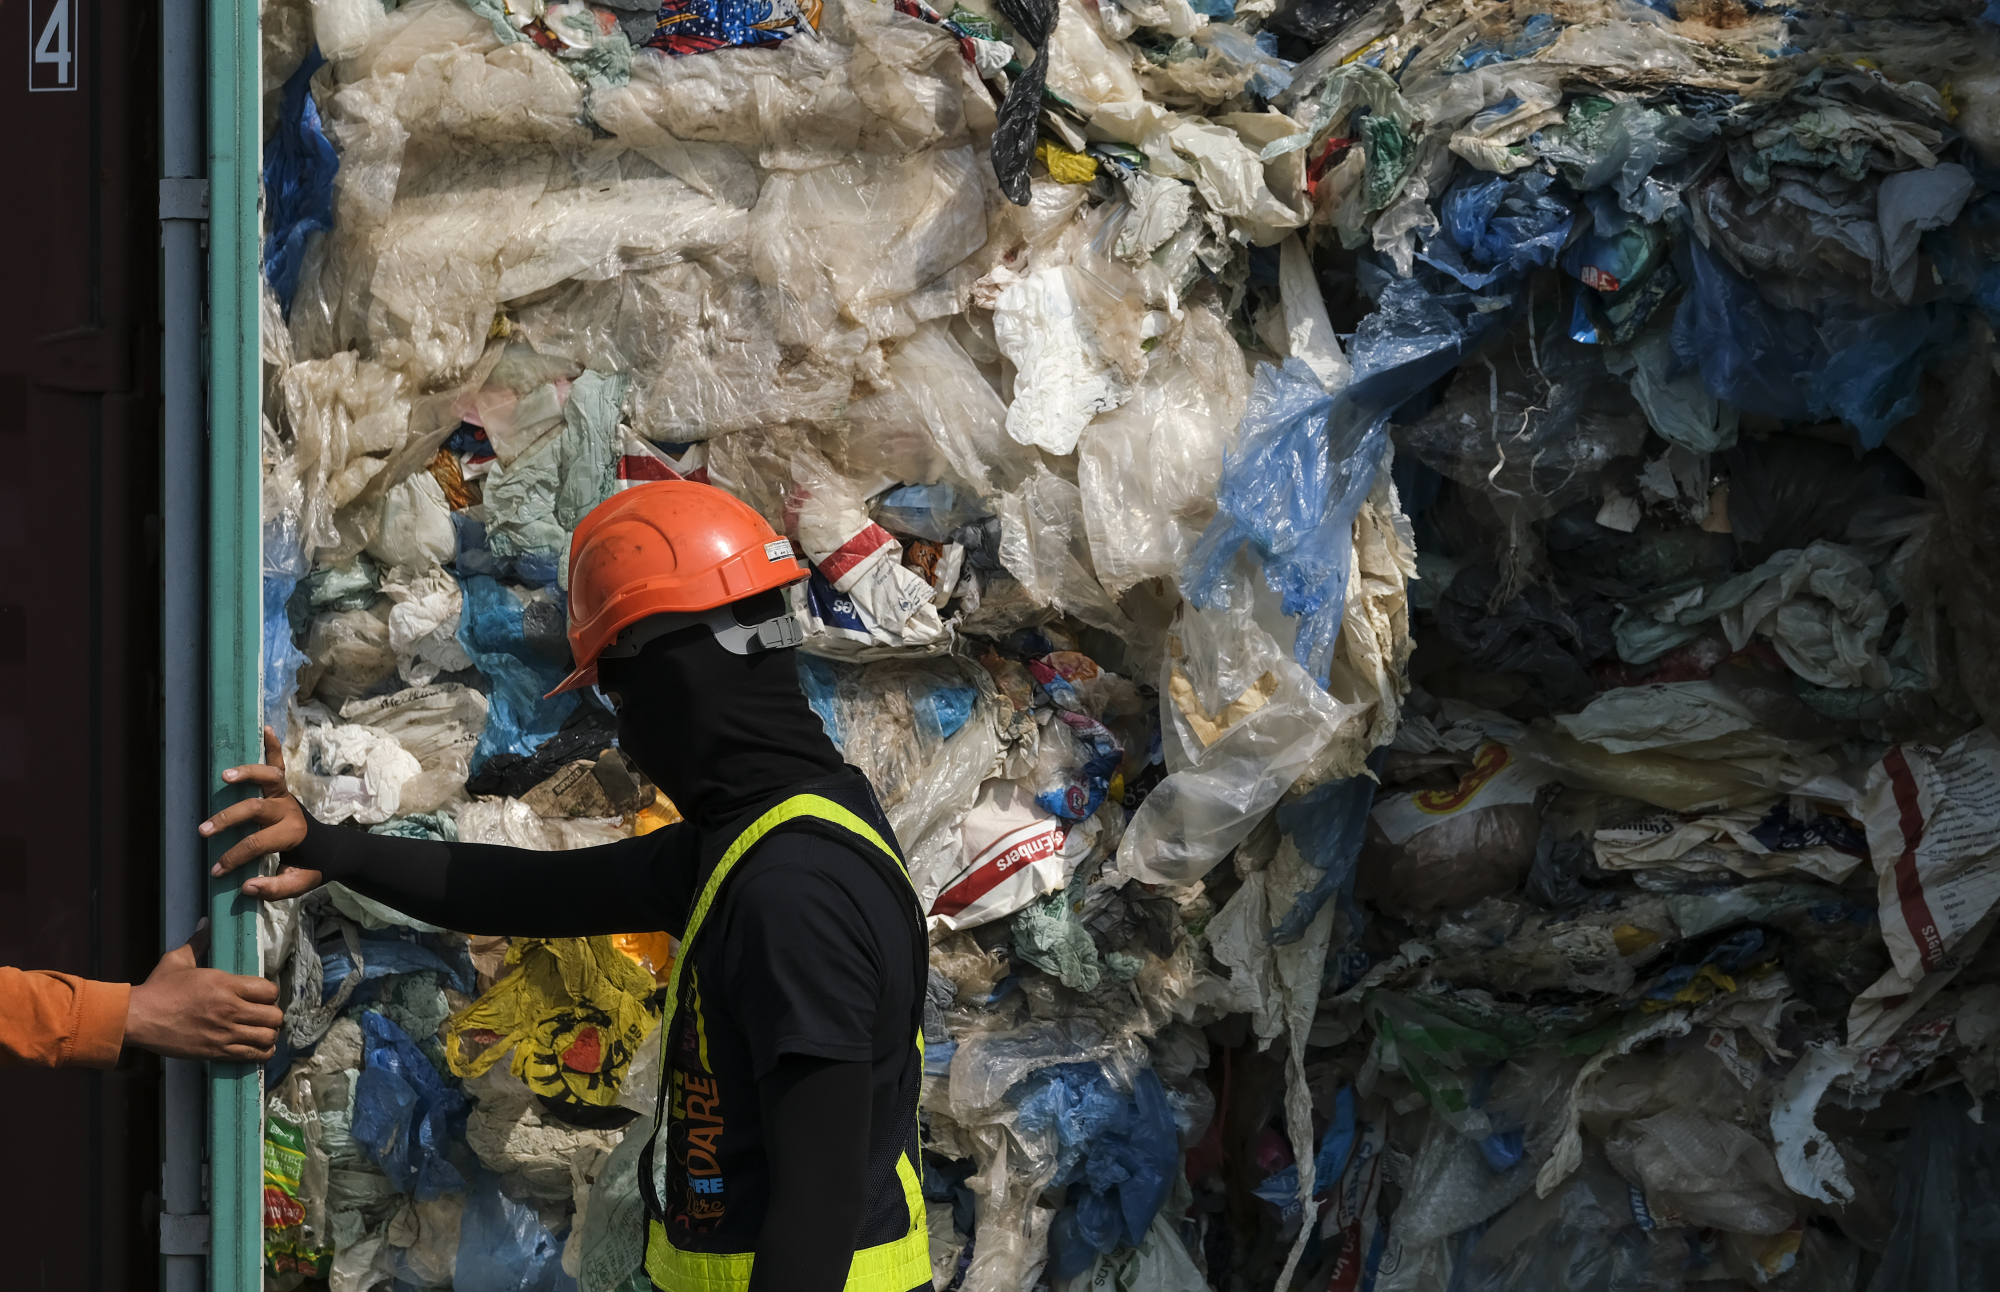 Containers filled with plastic waste are seen on display at Port Klang in Selangor state, Malaysia, on Tuesday. | BLOOMBERG